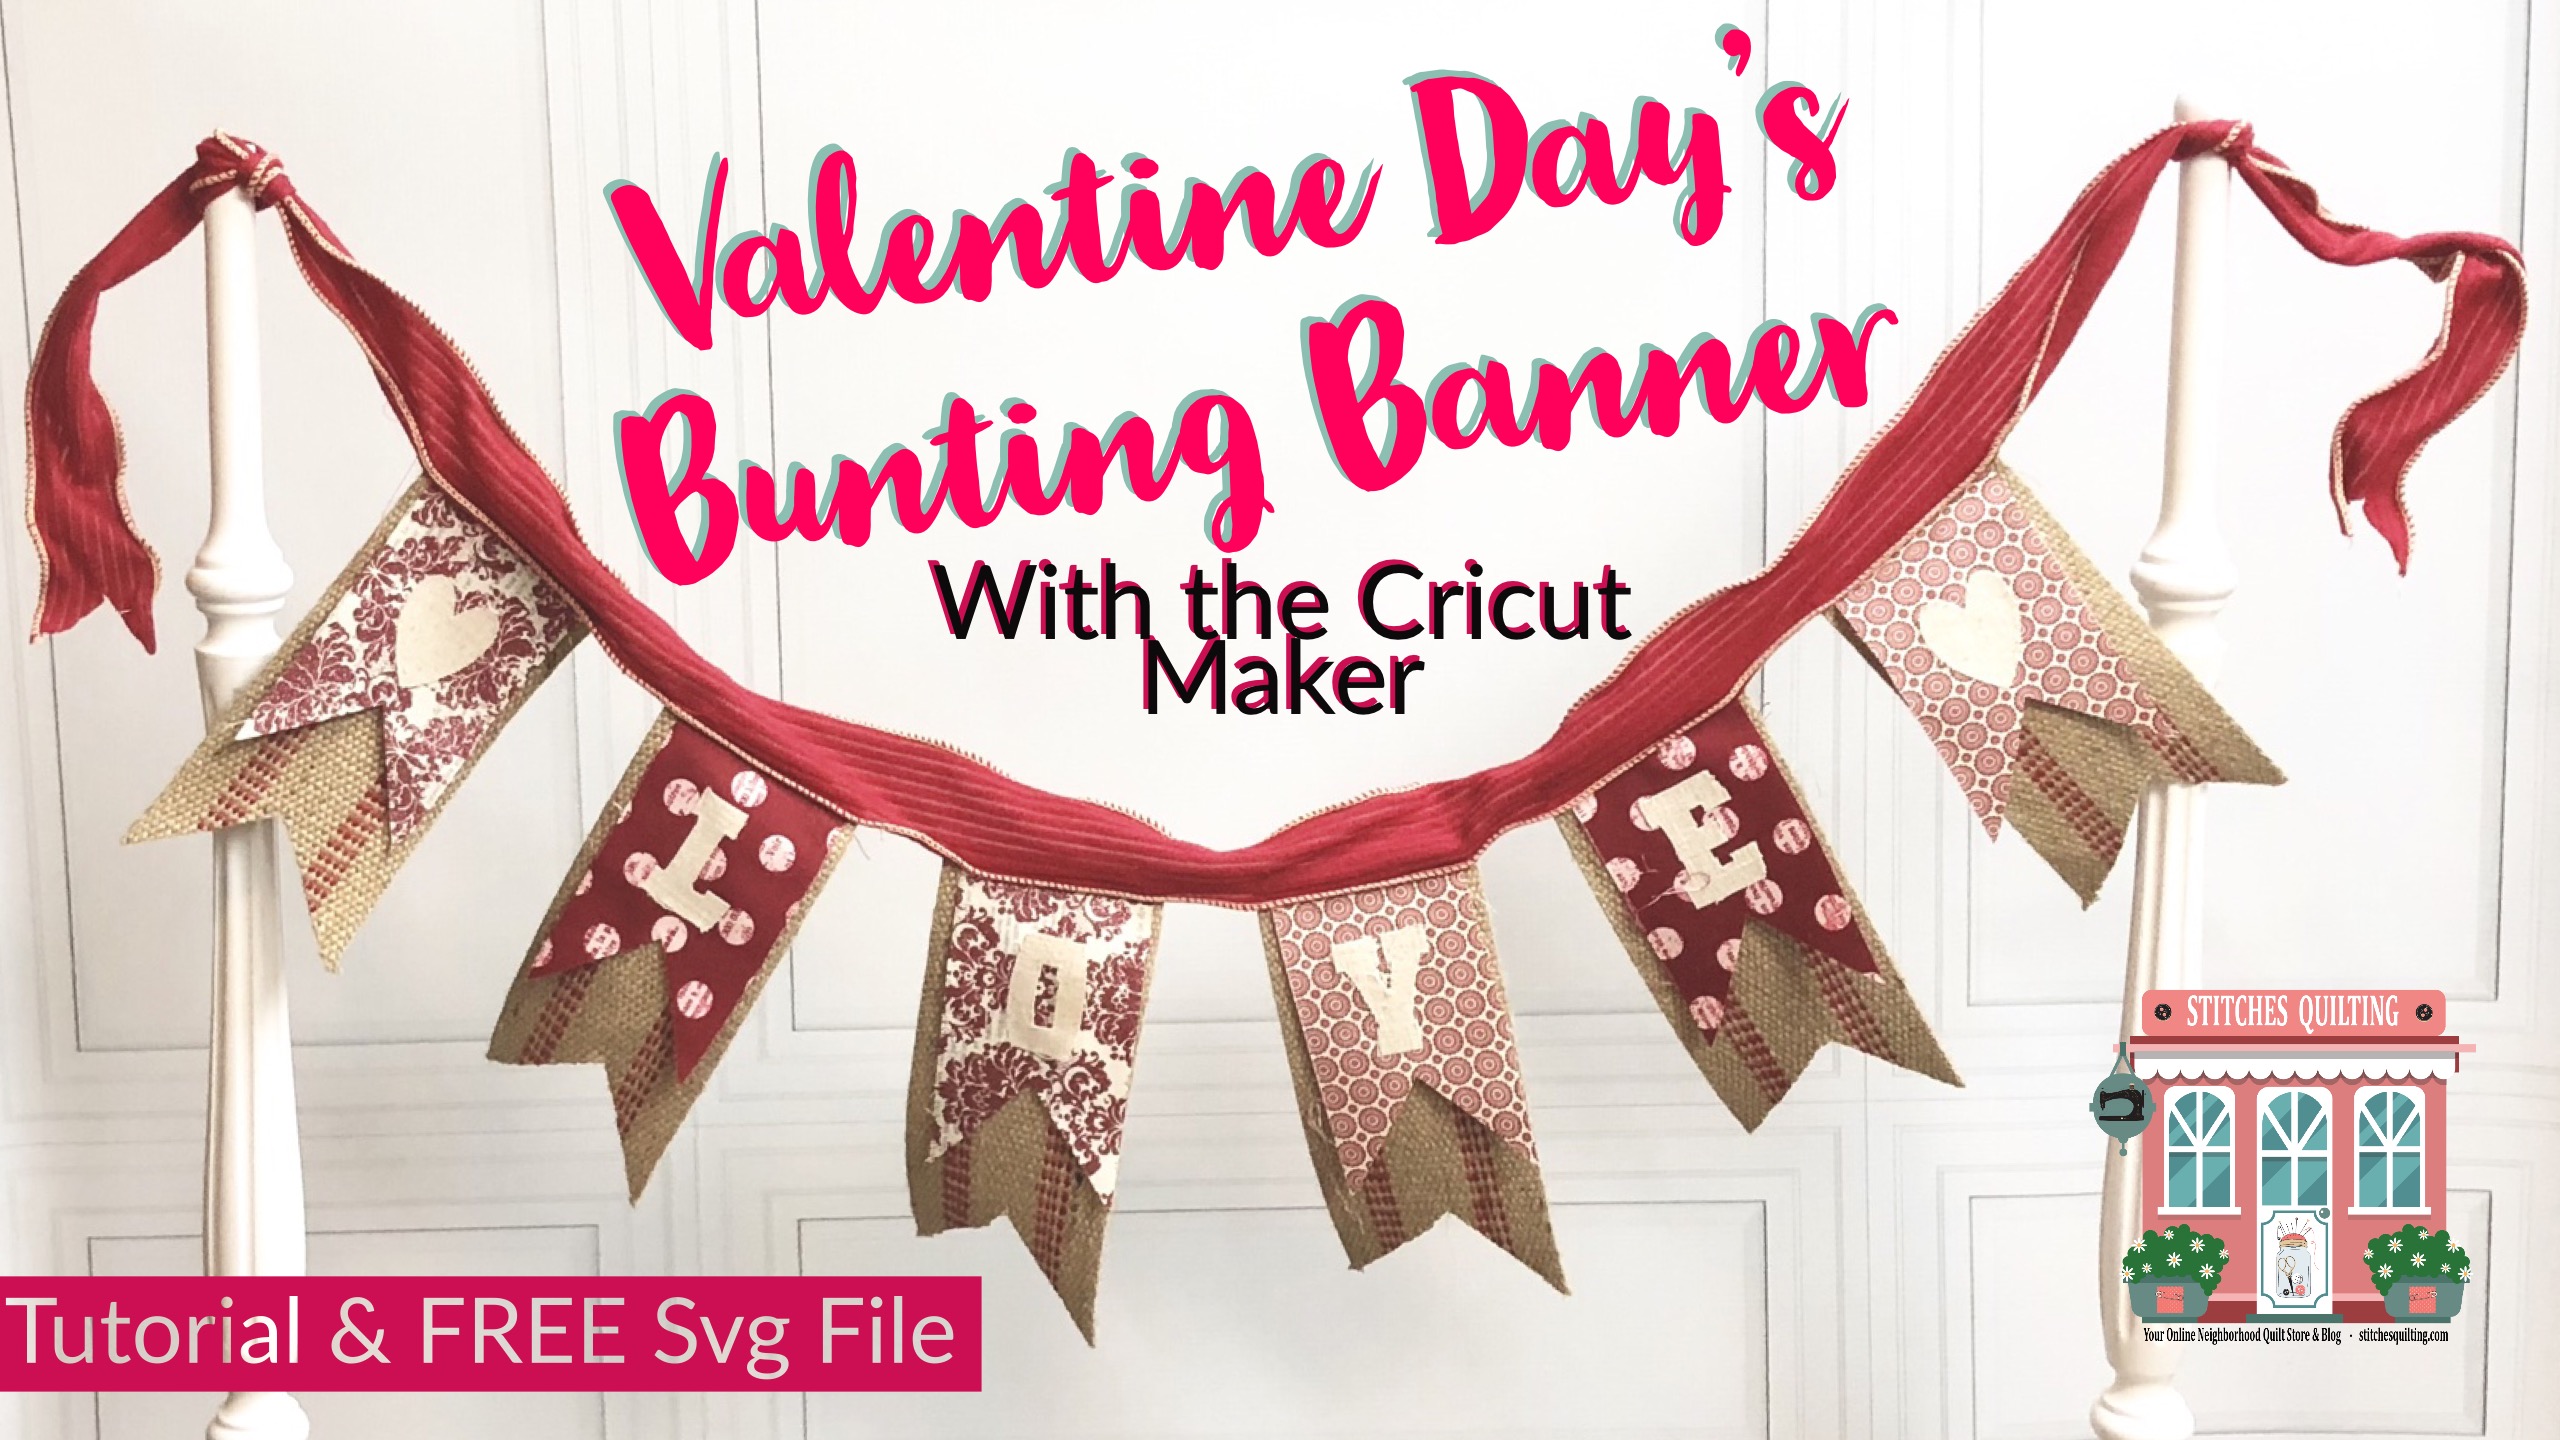 Bunting Banner Tutorial With The Cricut Maker Stitches Quilting